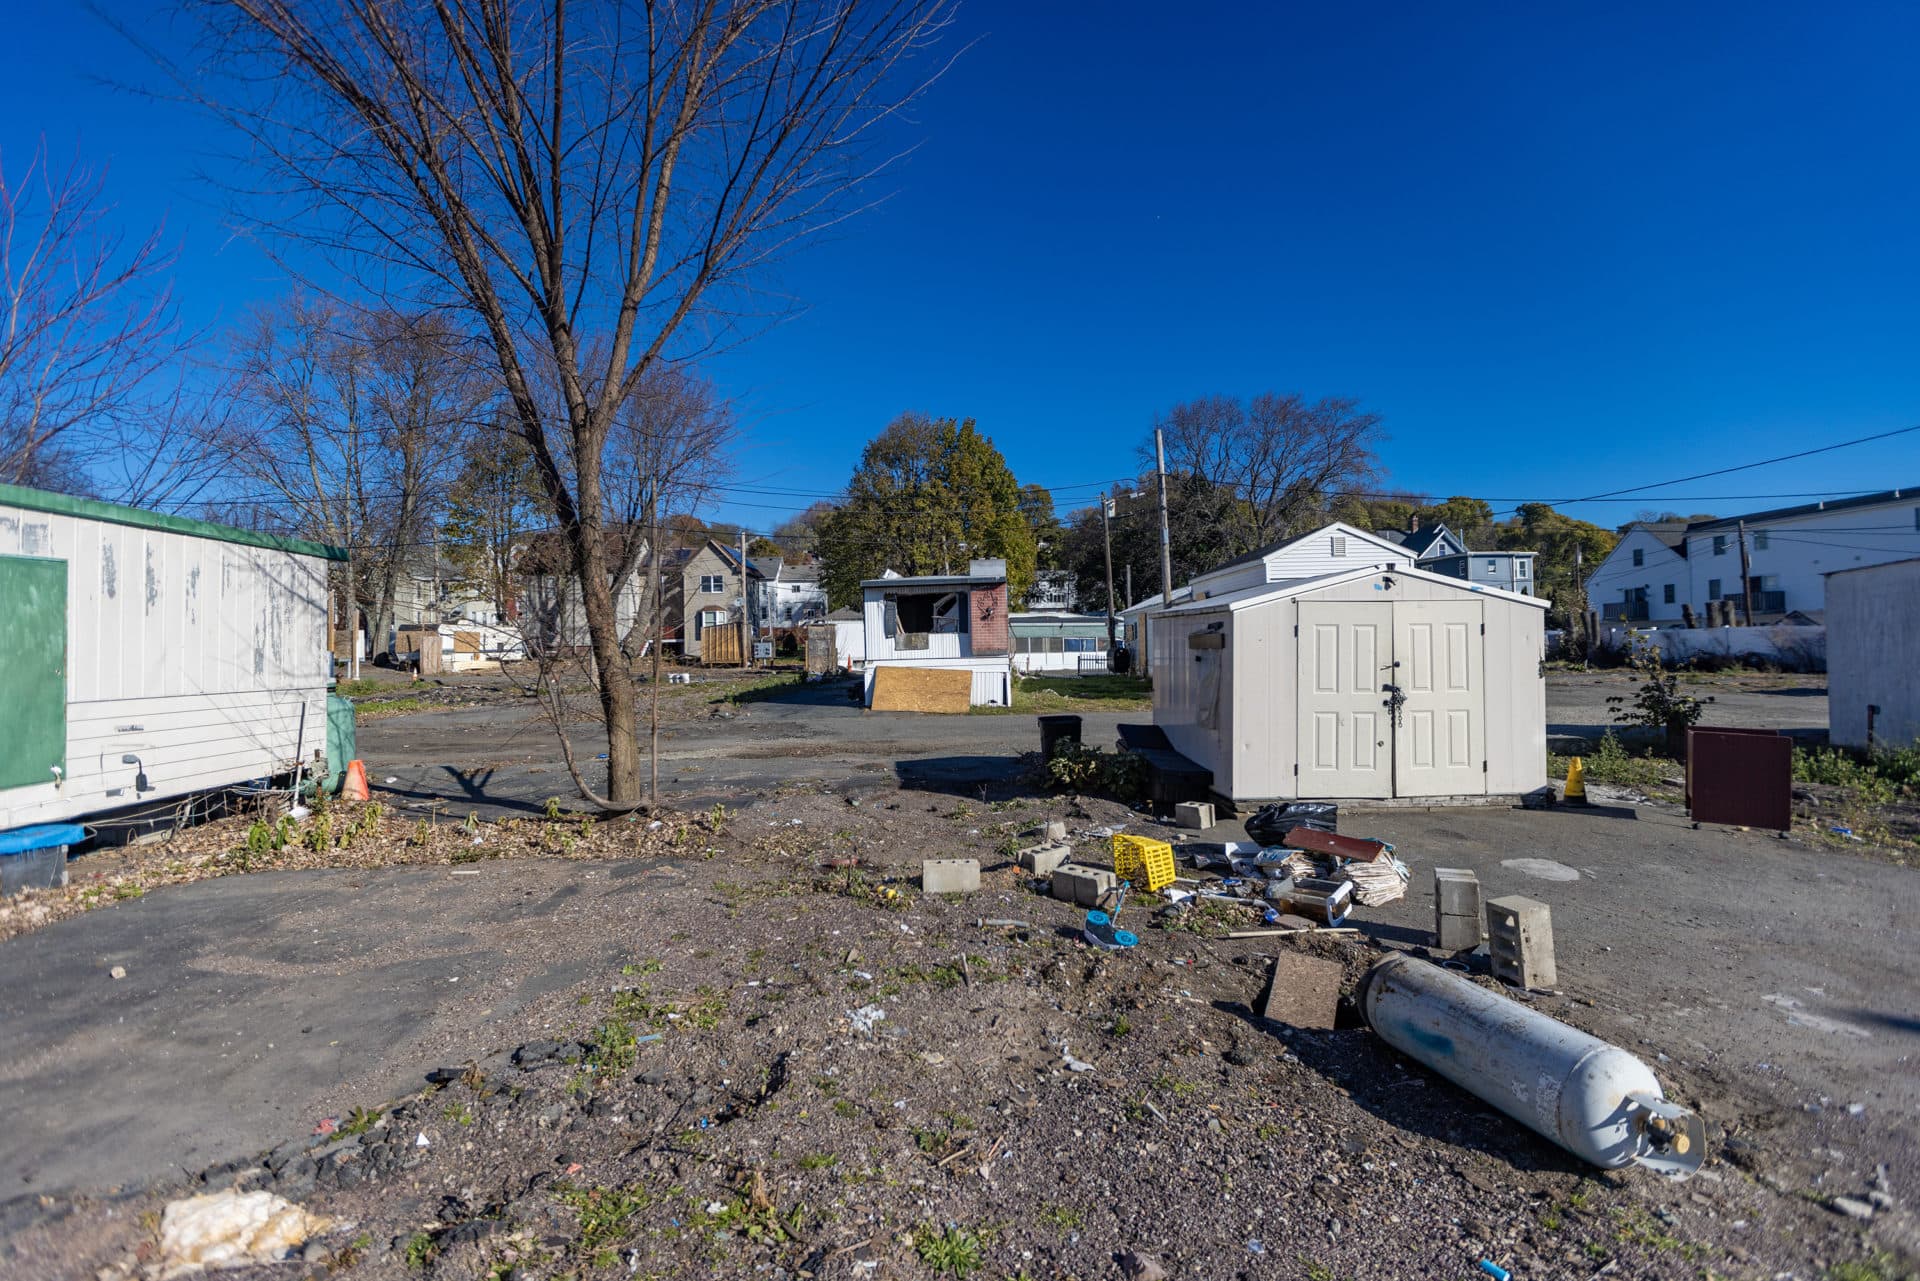 Boarded up and abandoned trailers at Lee’s Trailer Park in Revere. (Jesse Costa/WBUR)